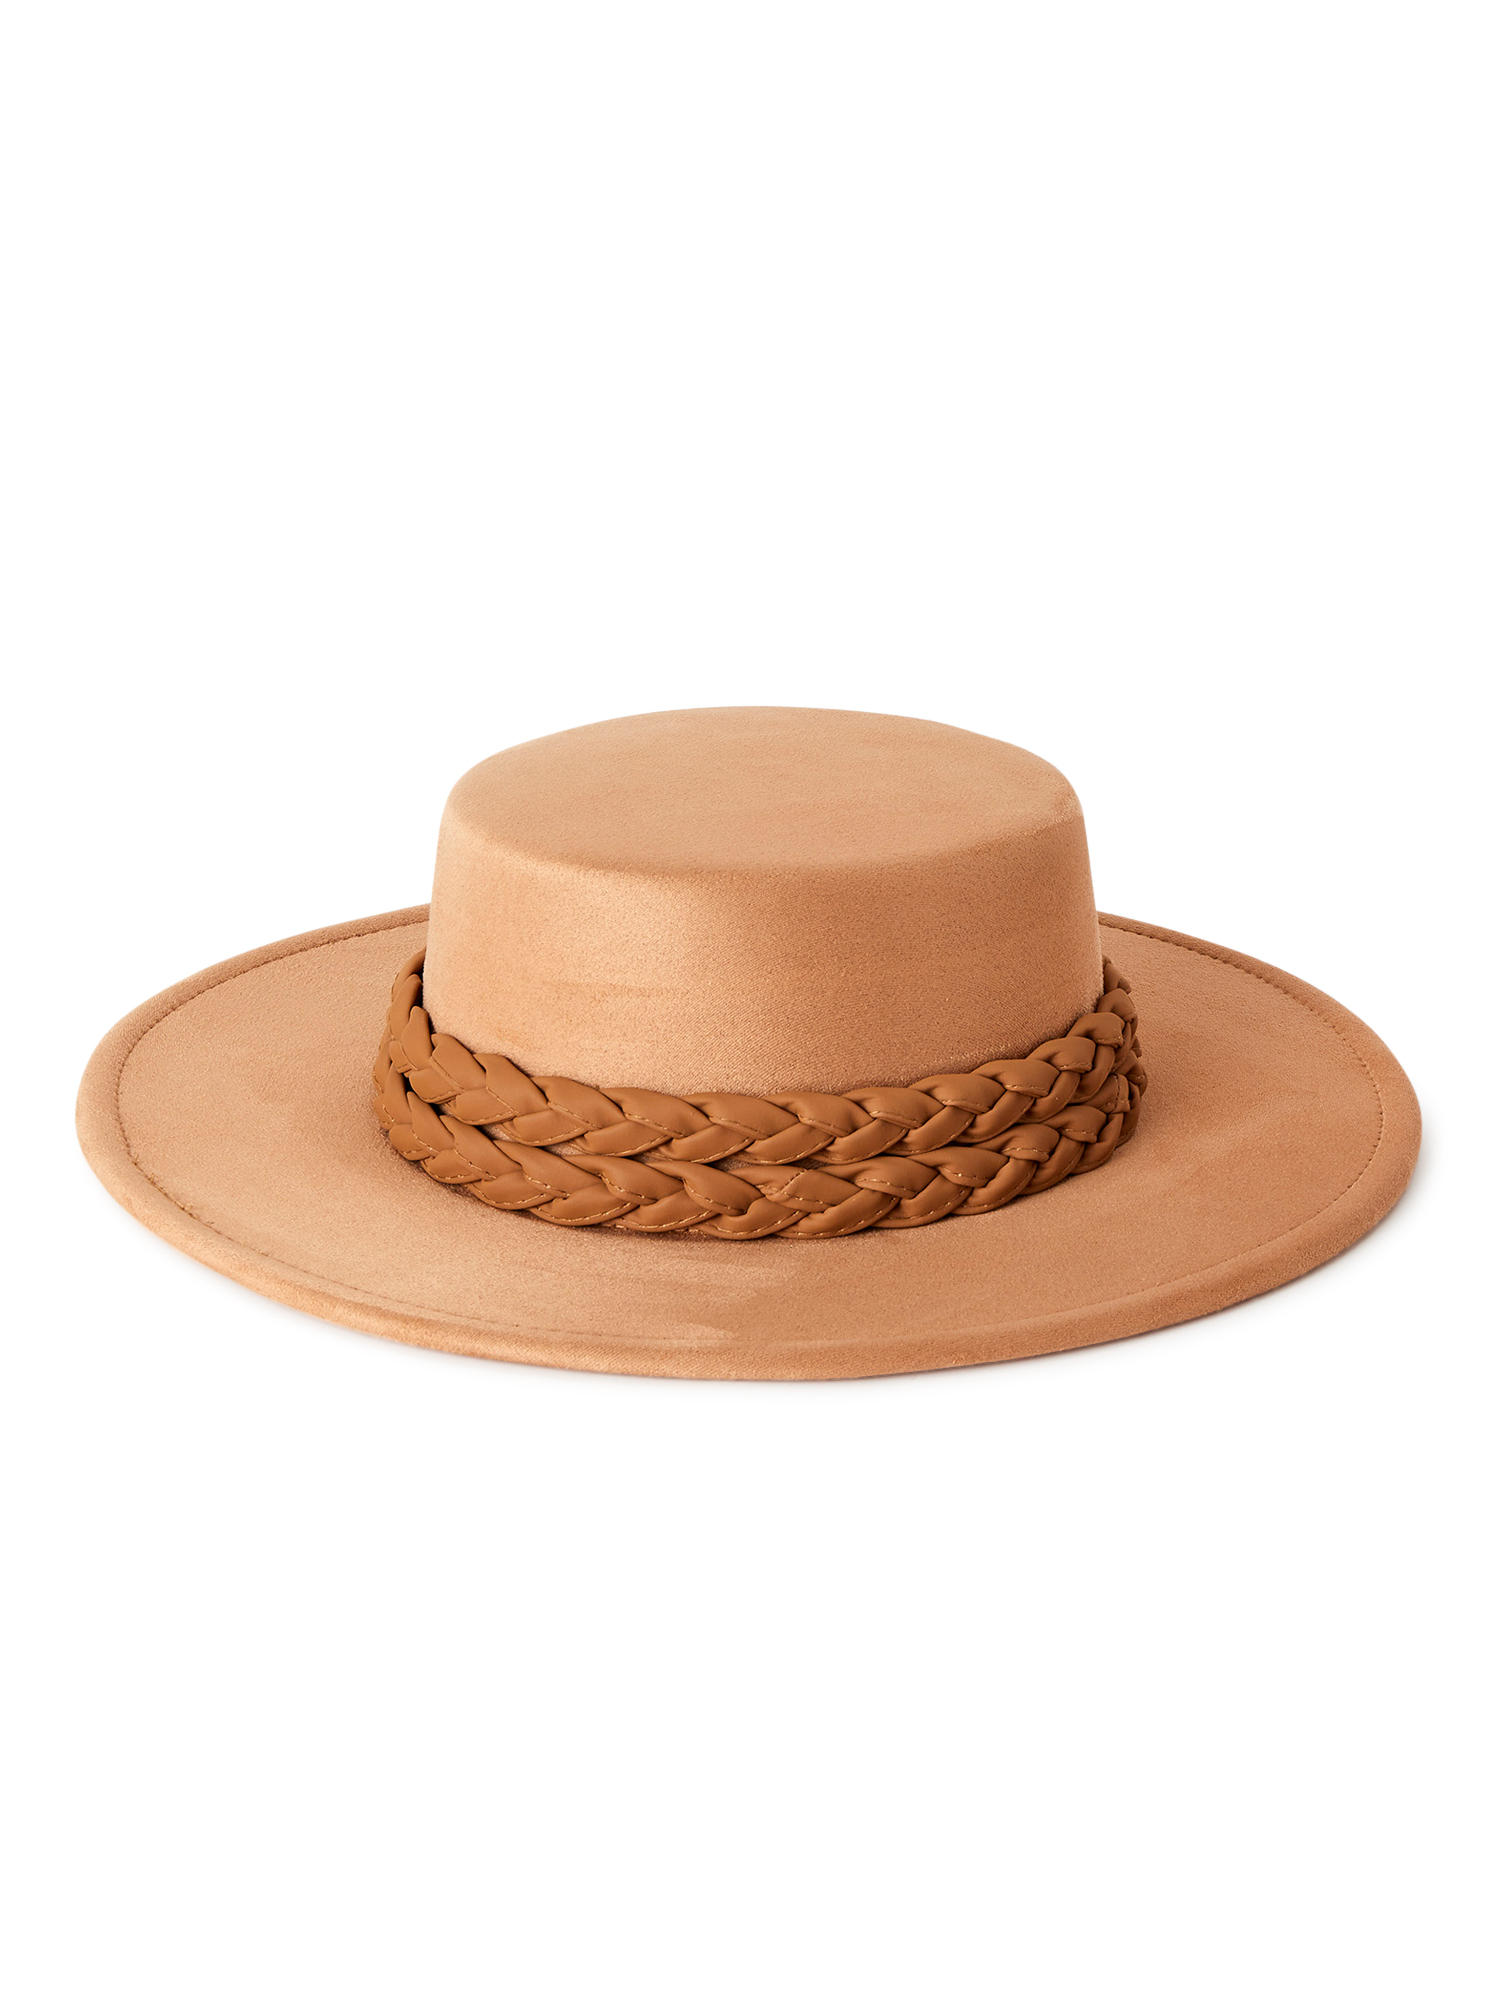 Time and Tru Adult Women's Boater Hat with Braided Trim - image 2 of 3